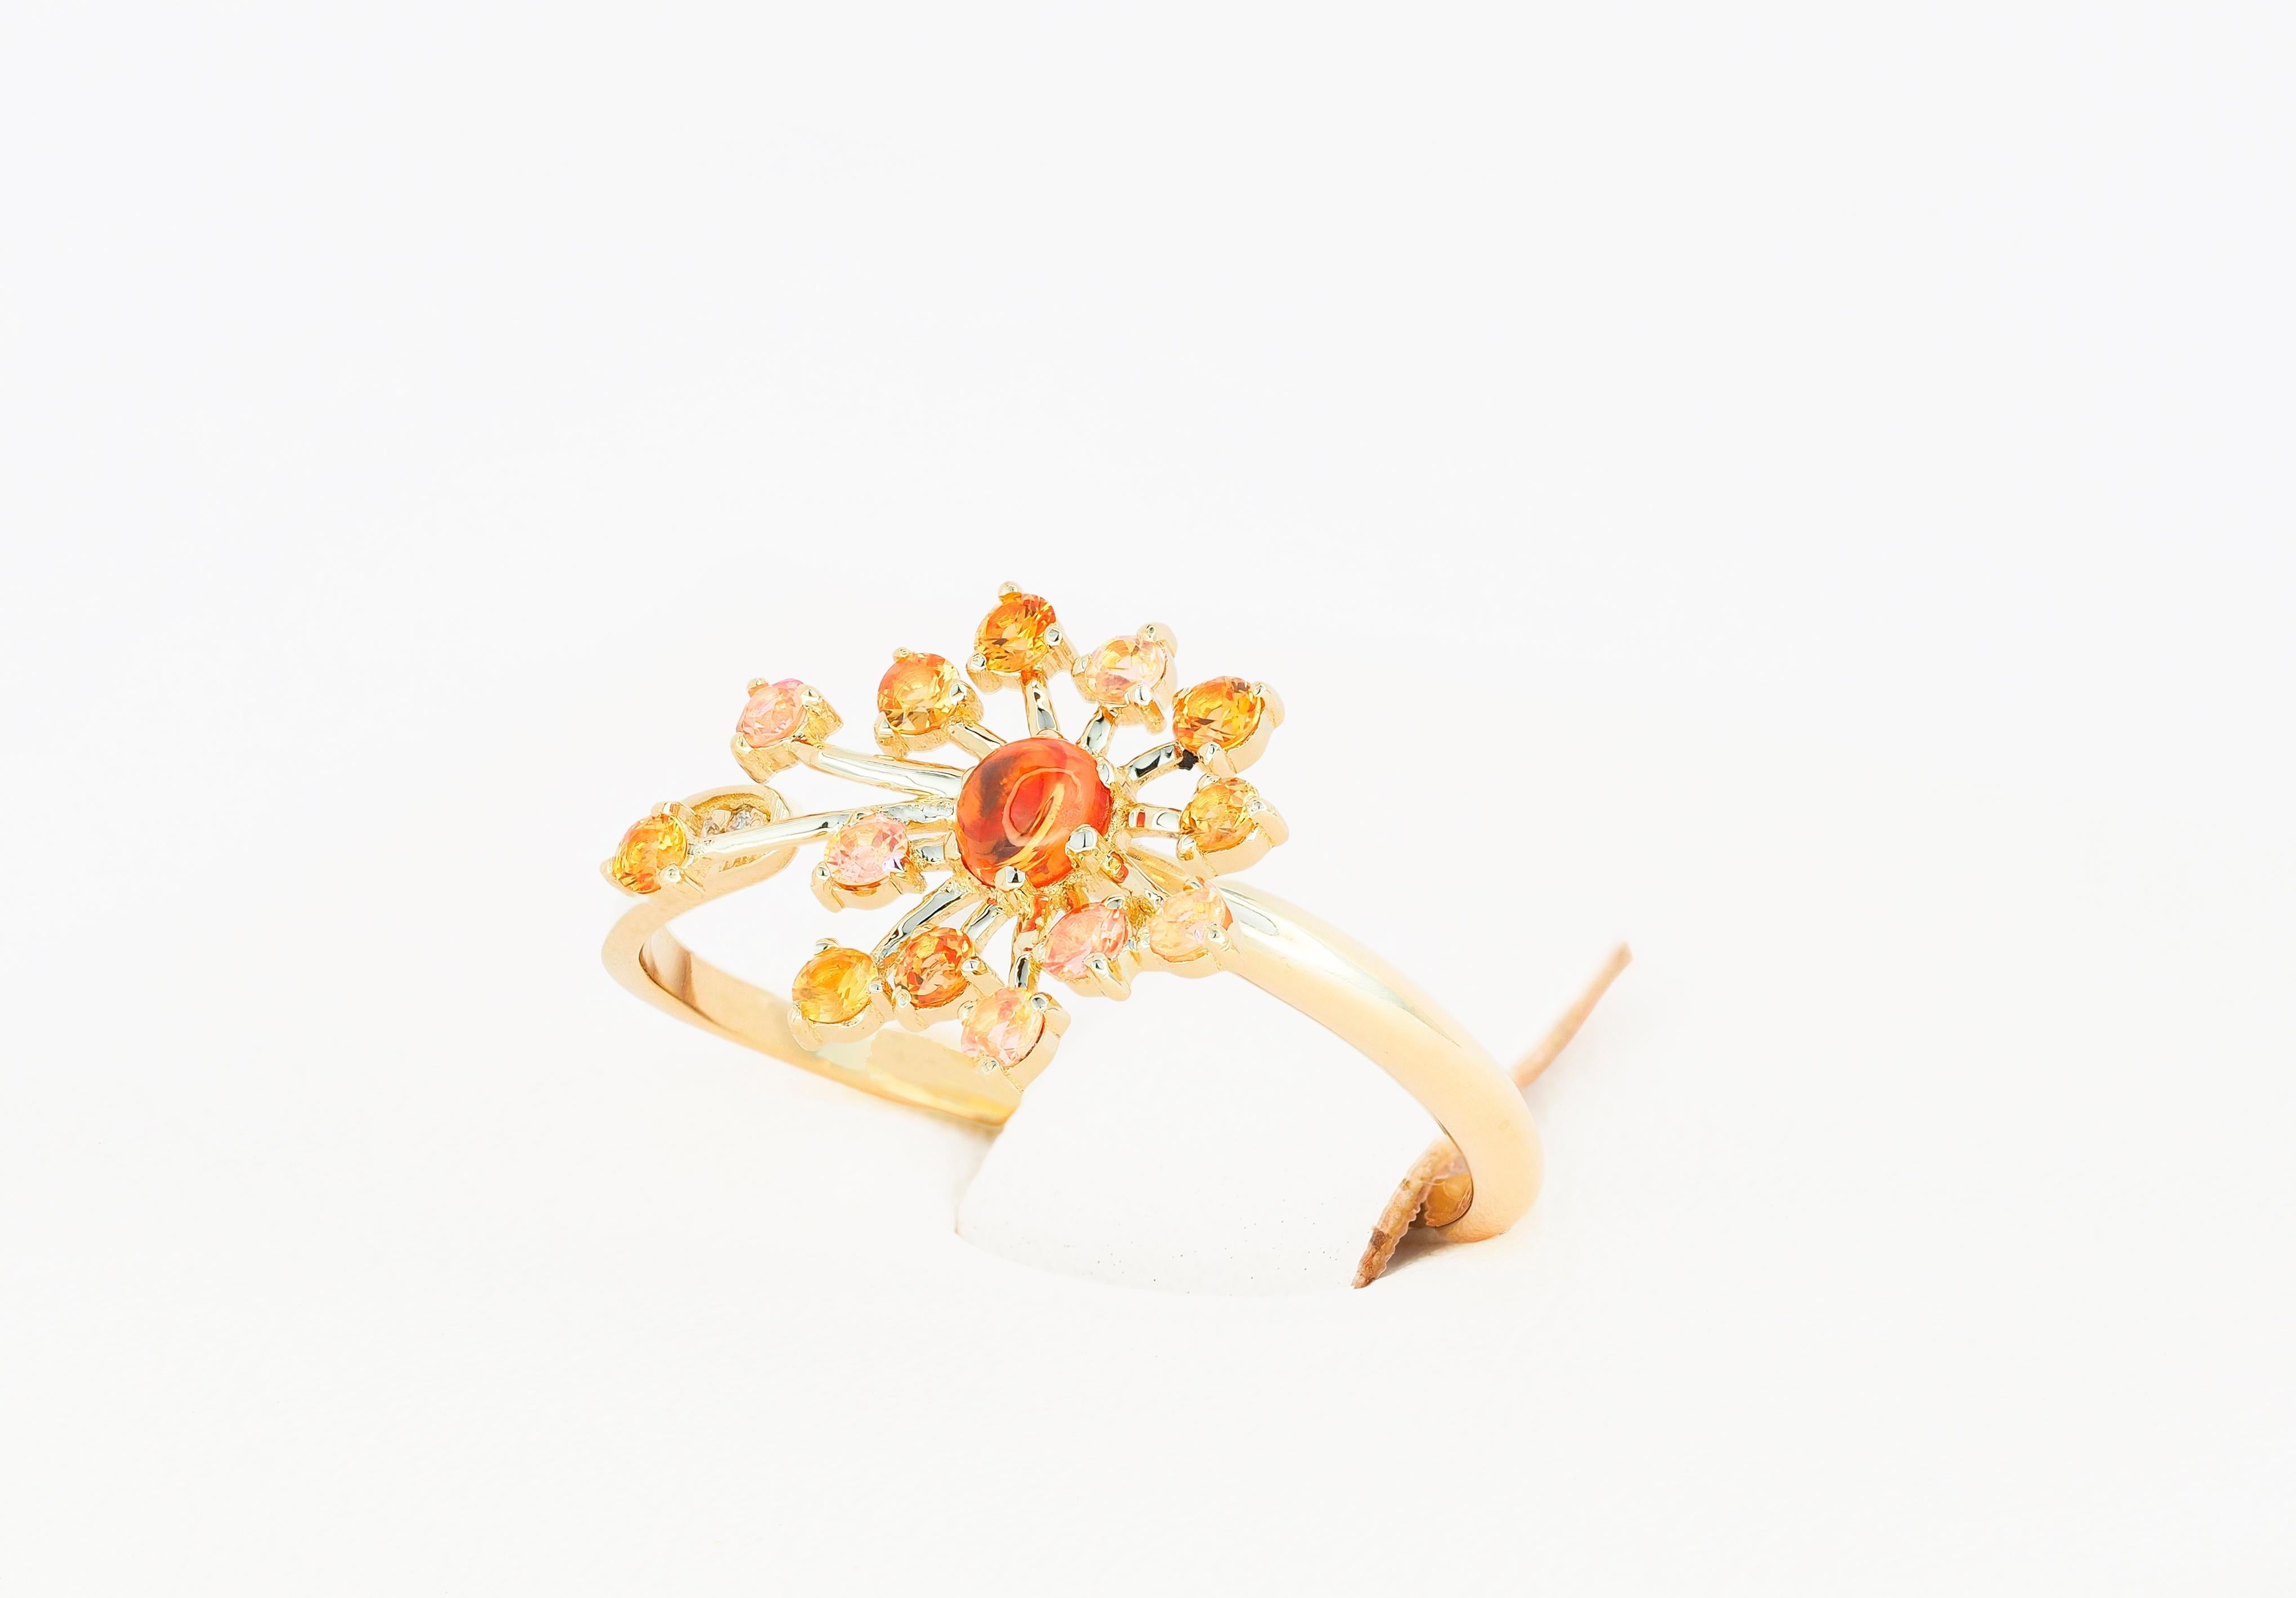 For Sale:  14 Karat Gold Ring with Yellow Sapphires. Dandelion Flower desing ring. 5